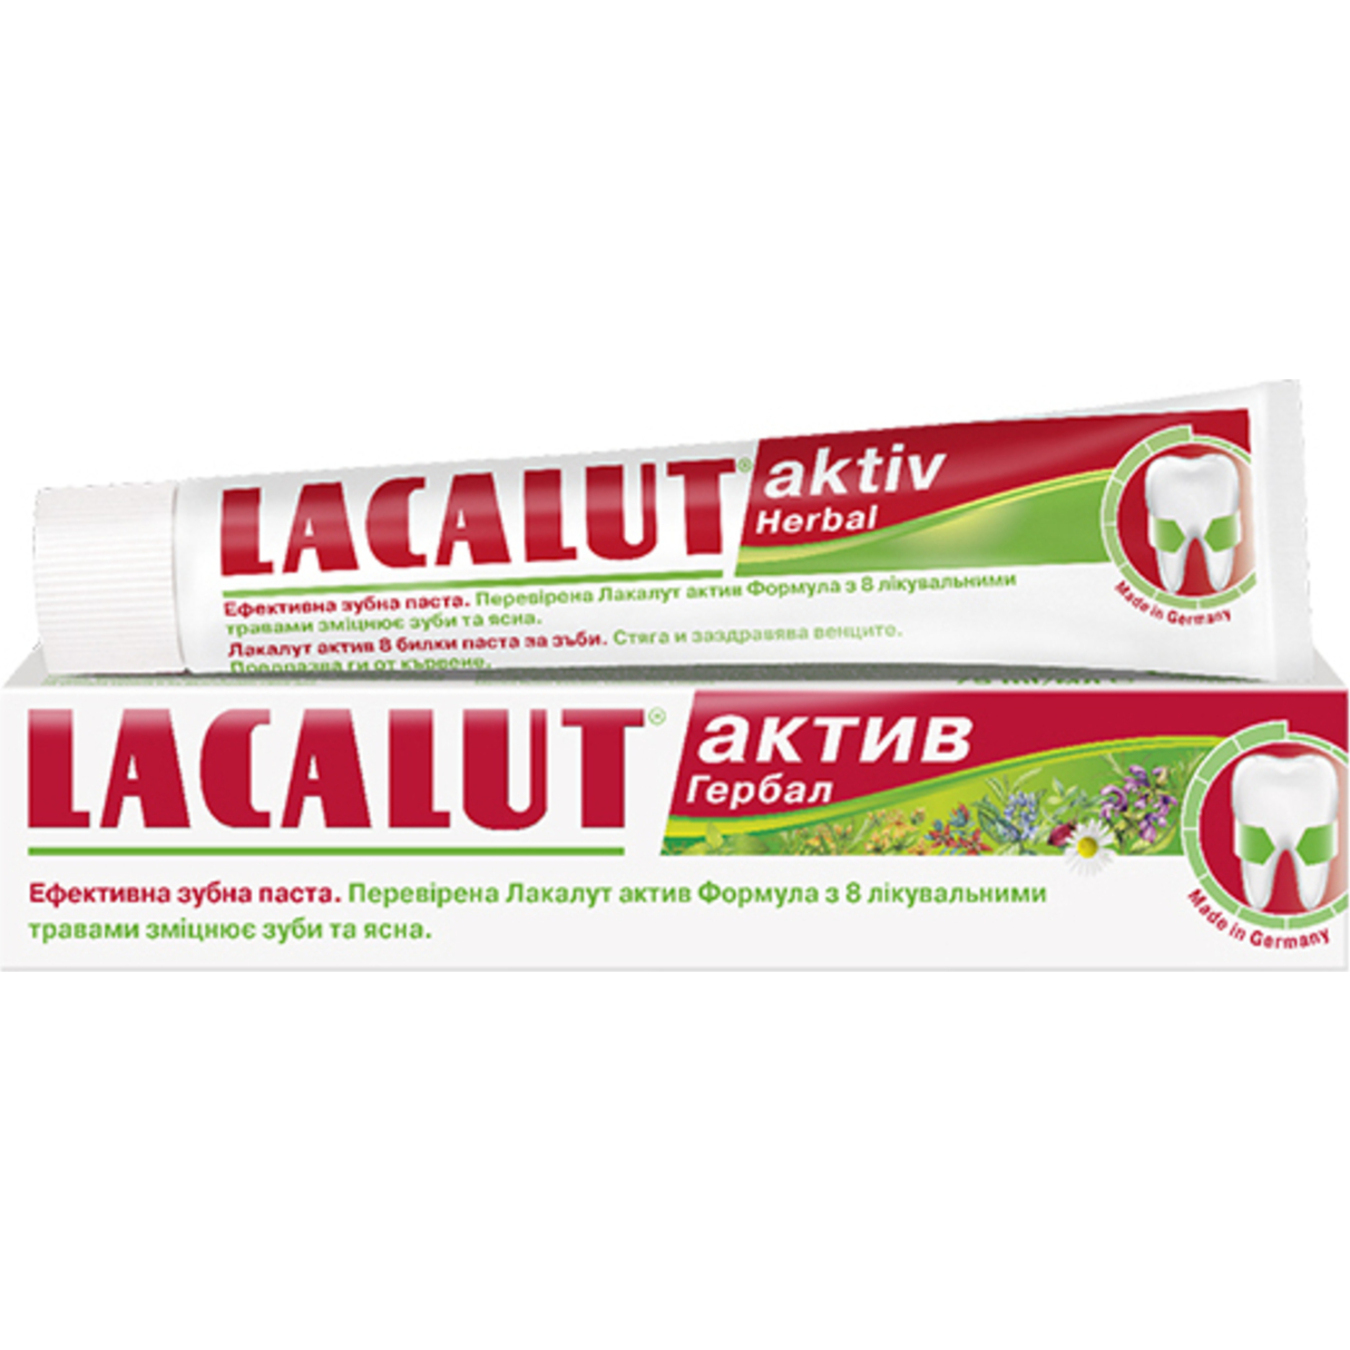 Lacalut active Herbal Toothpaste 75ml